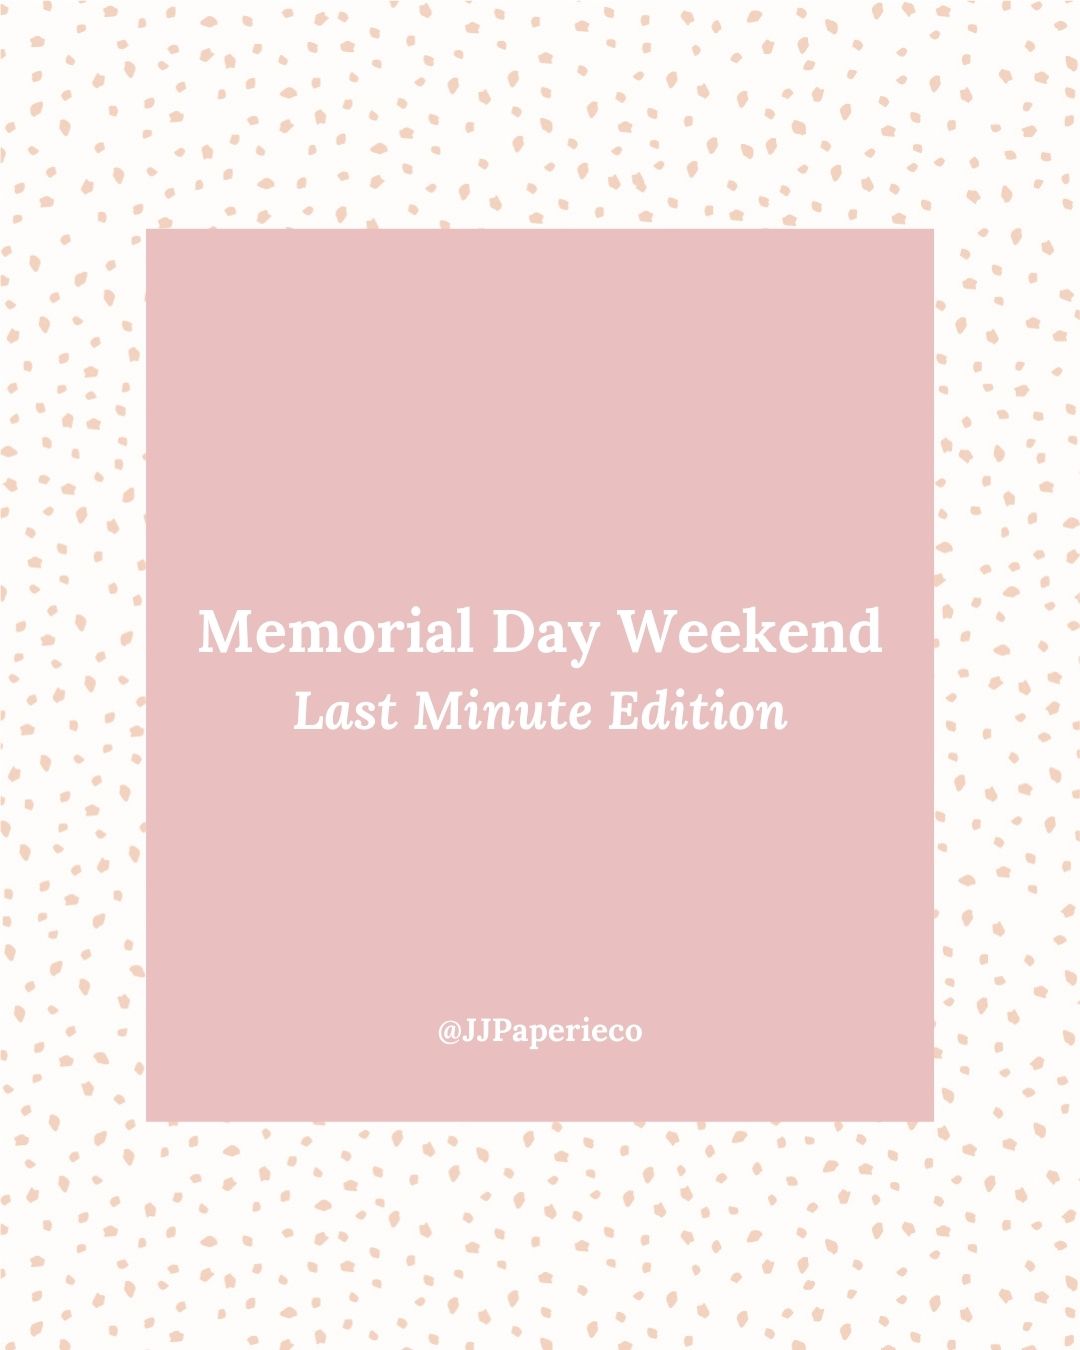 What to Do During Memorial Day Weekend  - Last Minute Edition: